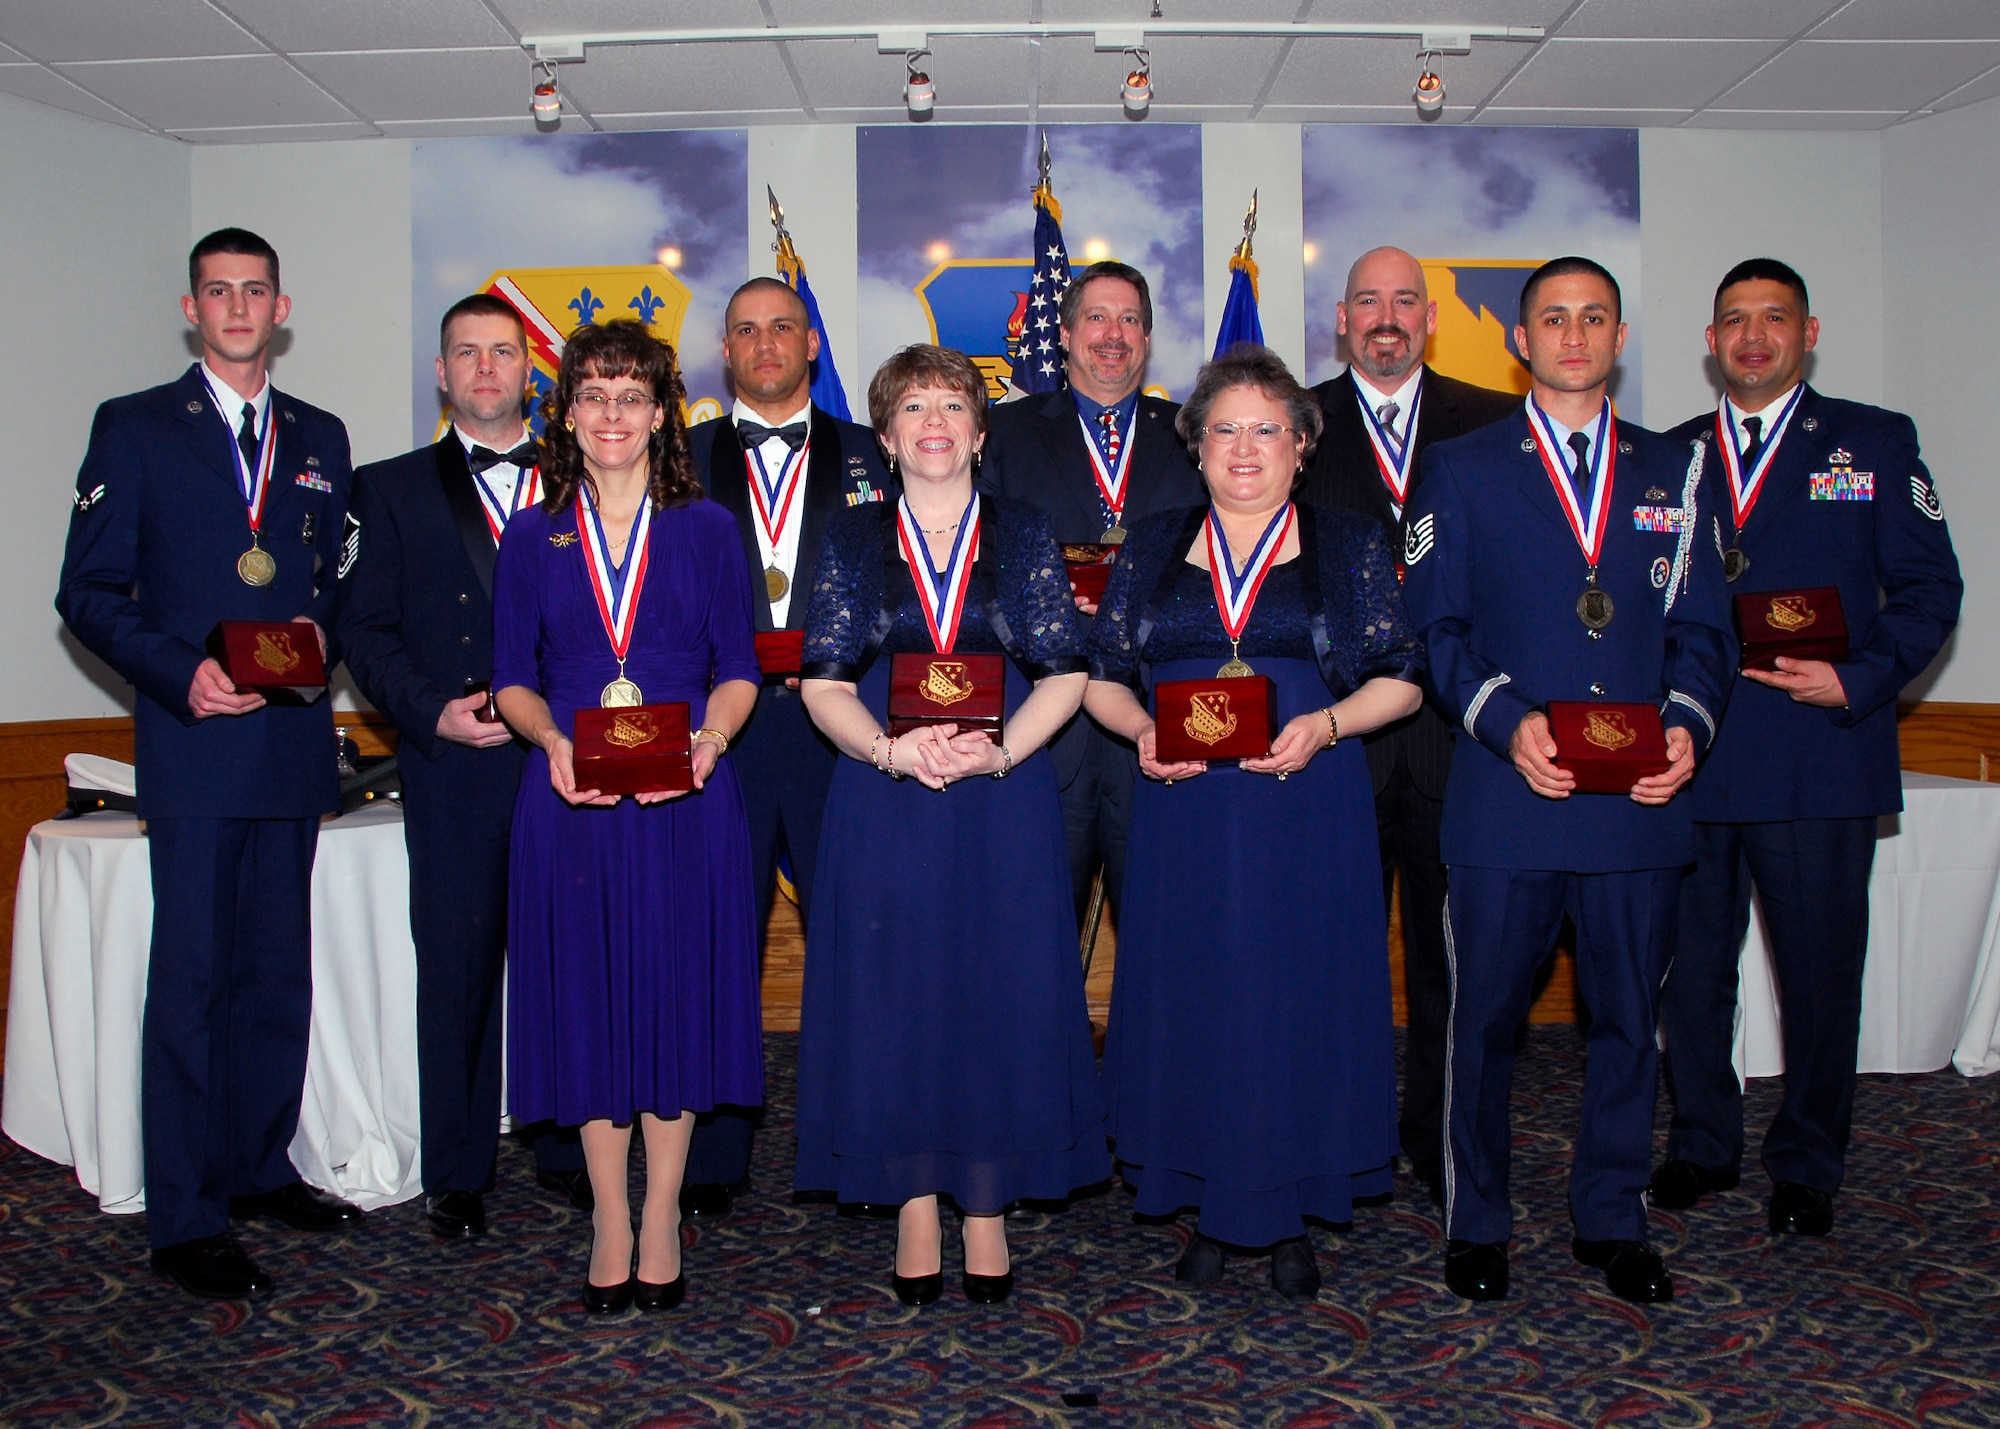 The 82nd Training Wing Annual Awards were presented by 82nd TRW Commander Brig. Gen. O.G. Mannon and Chief Master Sgt. Kenneth Sallinger, 82nd TRW command chief, March 5 to recognize the best of the wing's Airmen. Pictured from left to right on the first row are Marta Garcia, 82nd Dental Squadron, Robin Parrish, 82nd Medical Operations Squadron, Linda Howard, 82nd Force Support Squadron, and Tech. Sgt. Christopher Huntington, 361st Training Squadron. Pictured from left to right on the second row are Airman 1st Class Keenan Mondragon, 82nd Security Forces Squadron, Master Sgt. William Aronowitz, 82nd Mission Support Group, Staff Sgt. Phillip Baham, 366th Training Squadron, Jason Durst, 82nd Training Group, Jeffrey Pittman, 361st TRS, and Tech. Sgt. Angel Armendariz, 364th TRS. (U.S. Air Force photo/Harry Tonemah) 